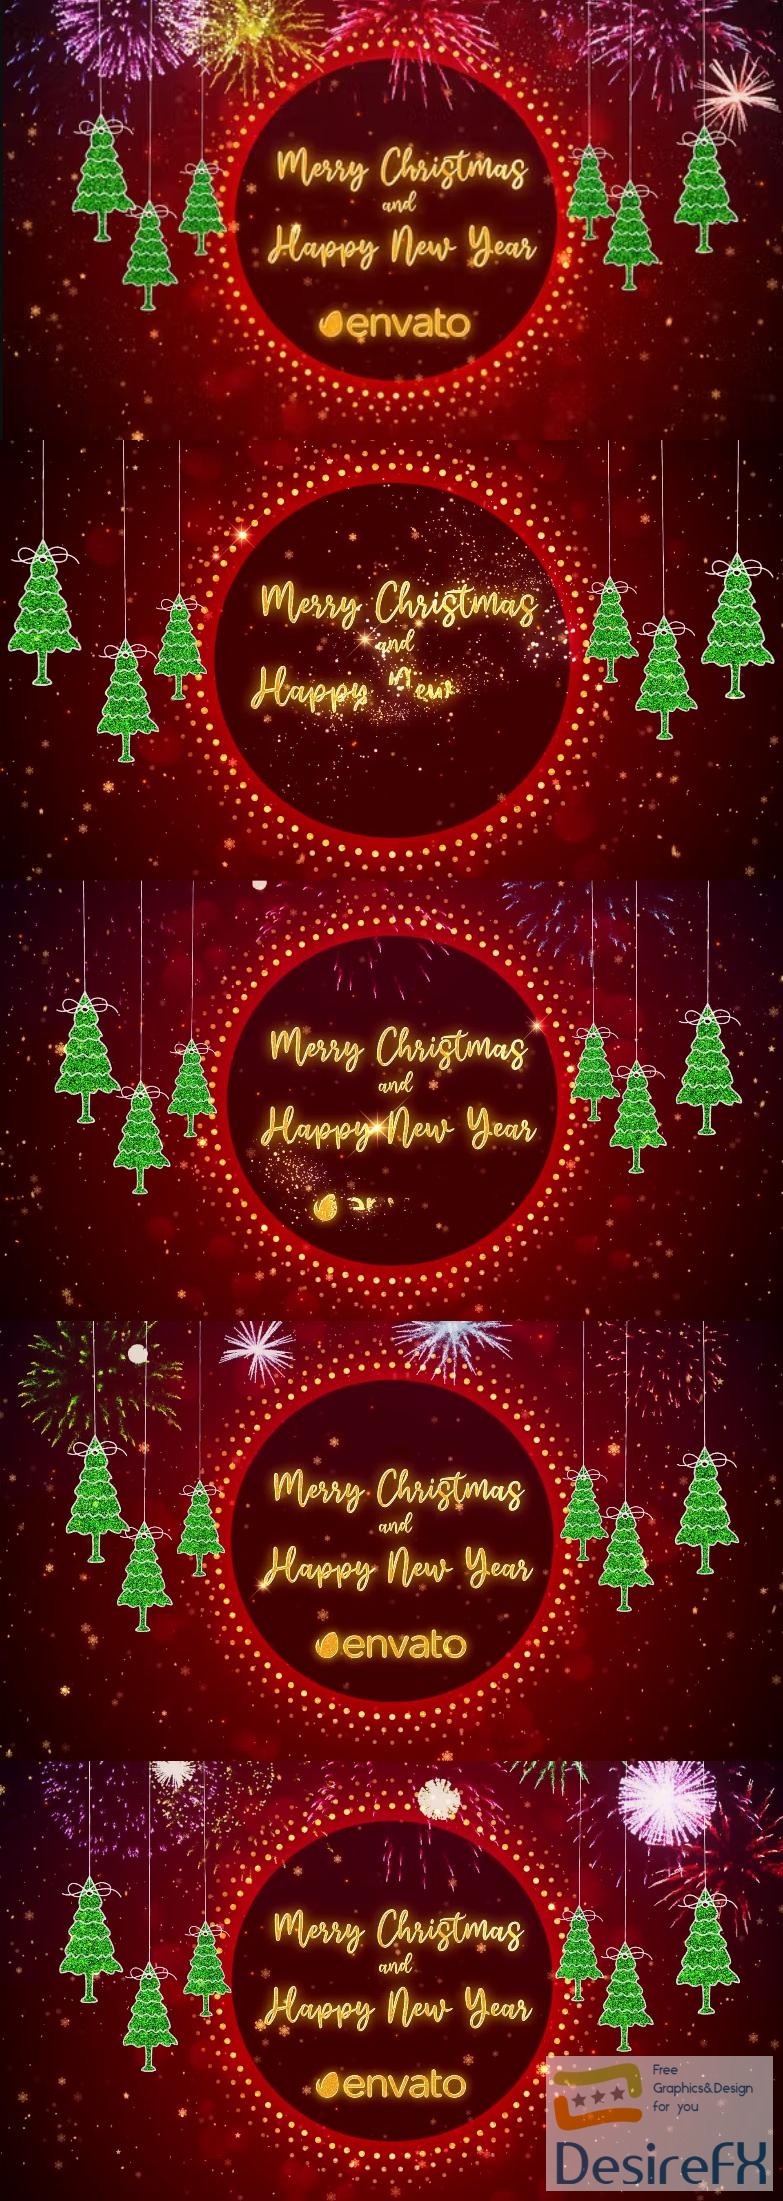 Videohive Christmas New Year Wishes 42278205